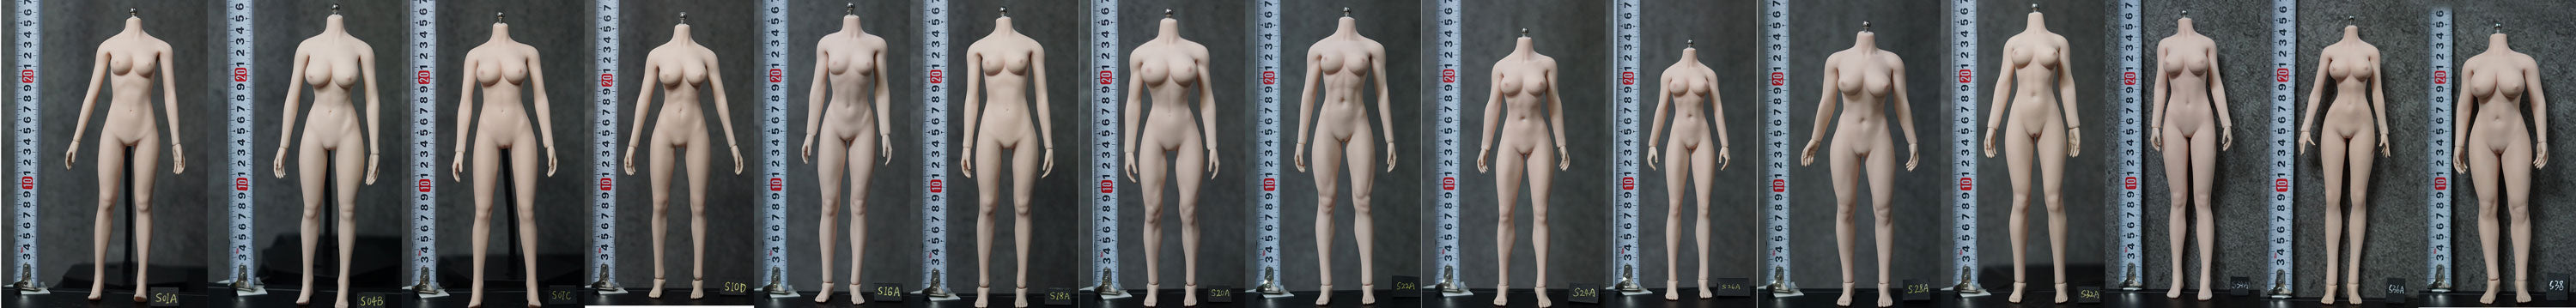 body - TBLeague / Phicen Seamless Bodies with Steel Skeleton Catalog (updated continually) - Page 5 7a89d1c4b5ac10d6f47c3bbfbc50e49e